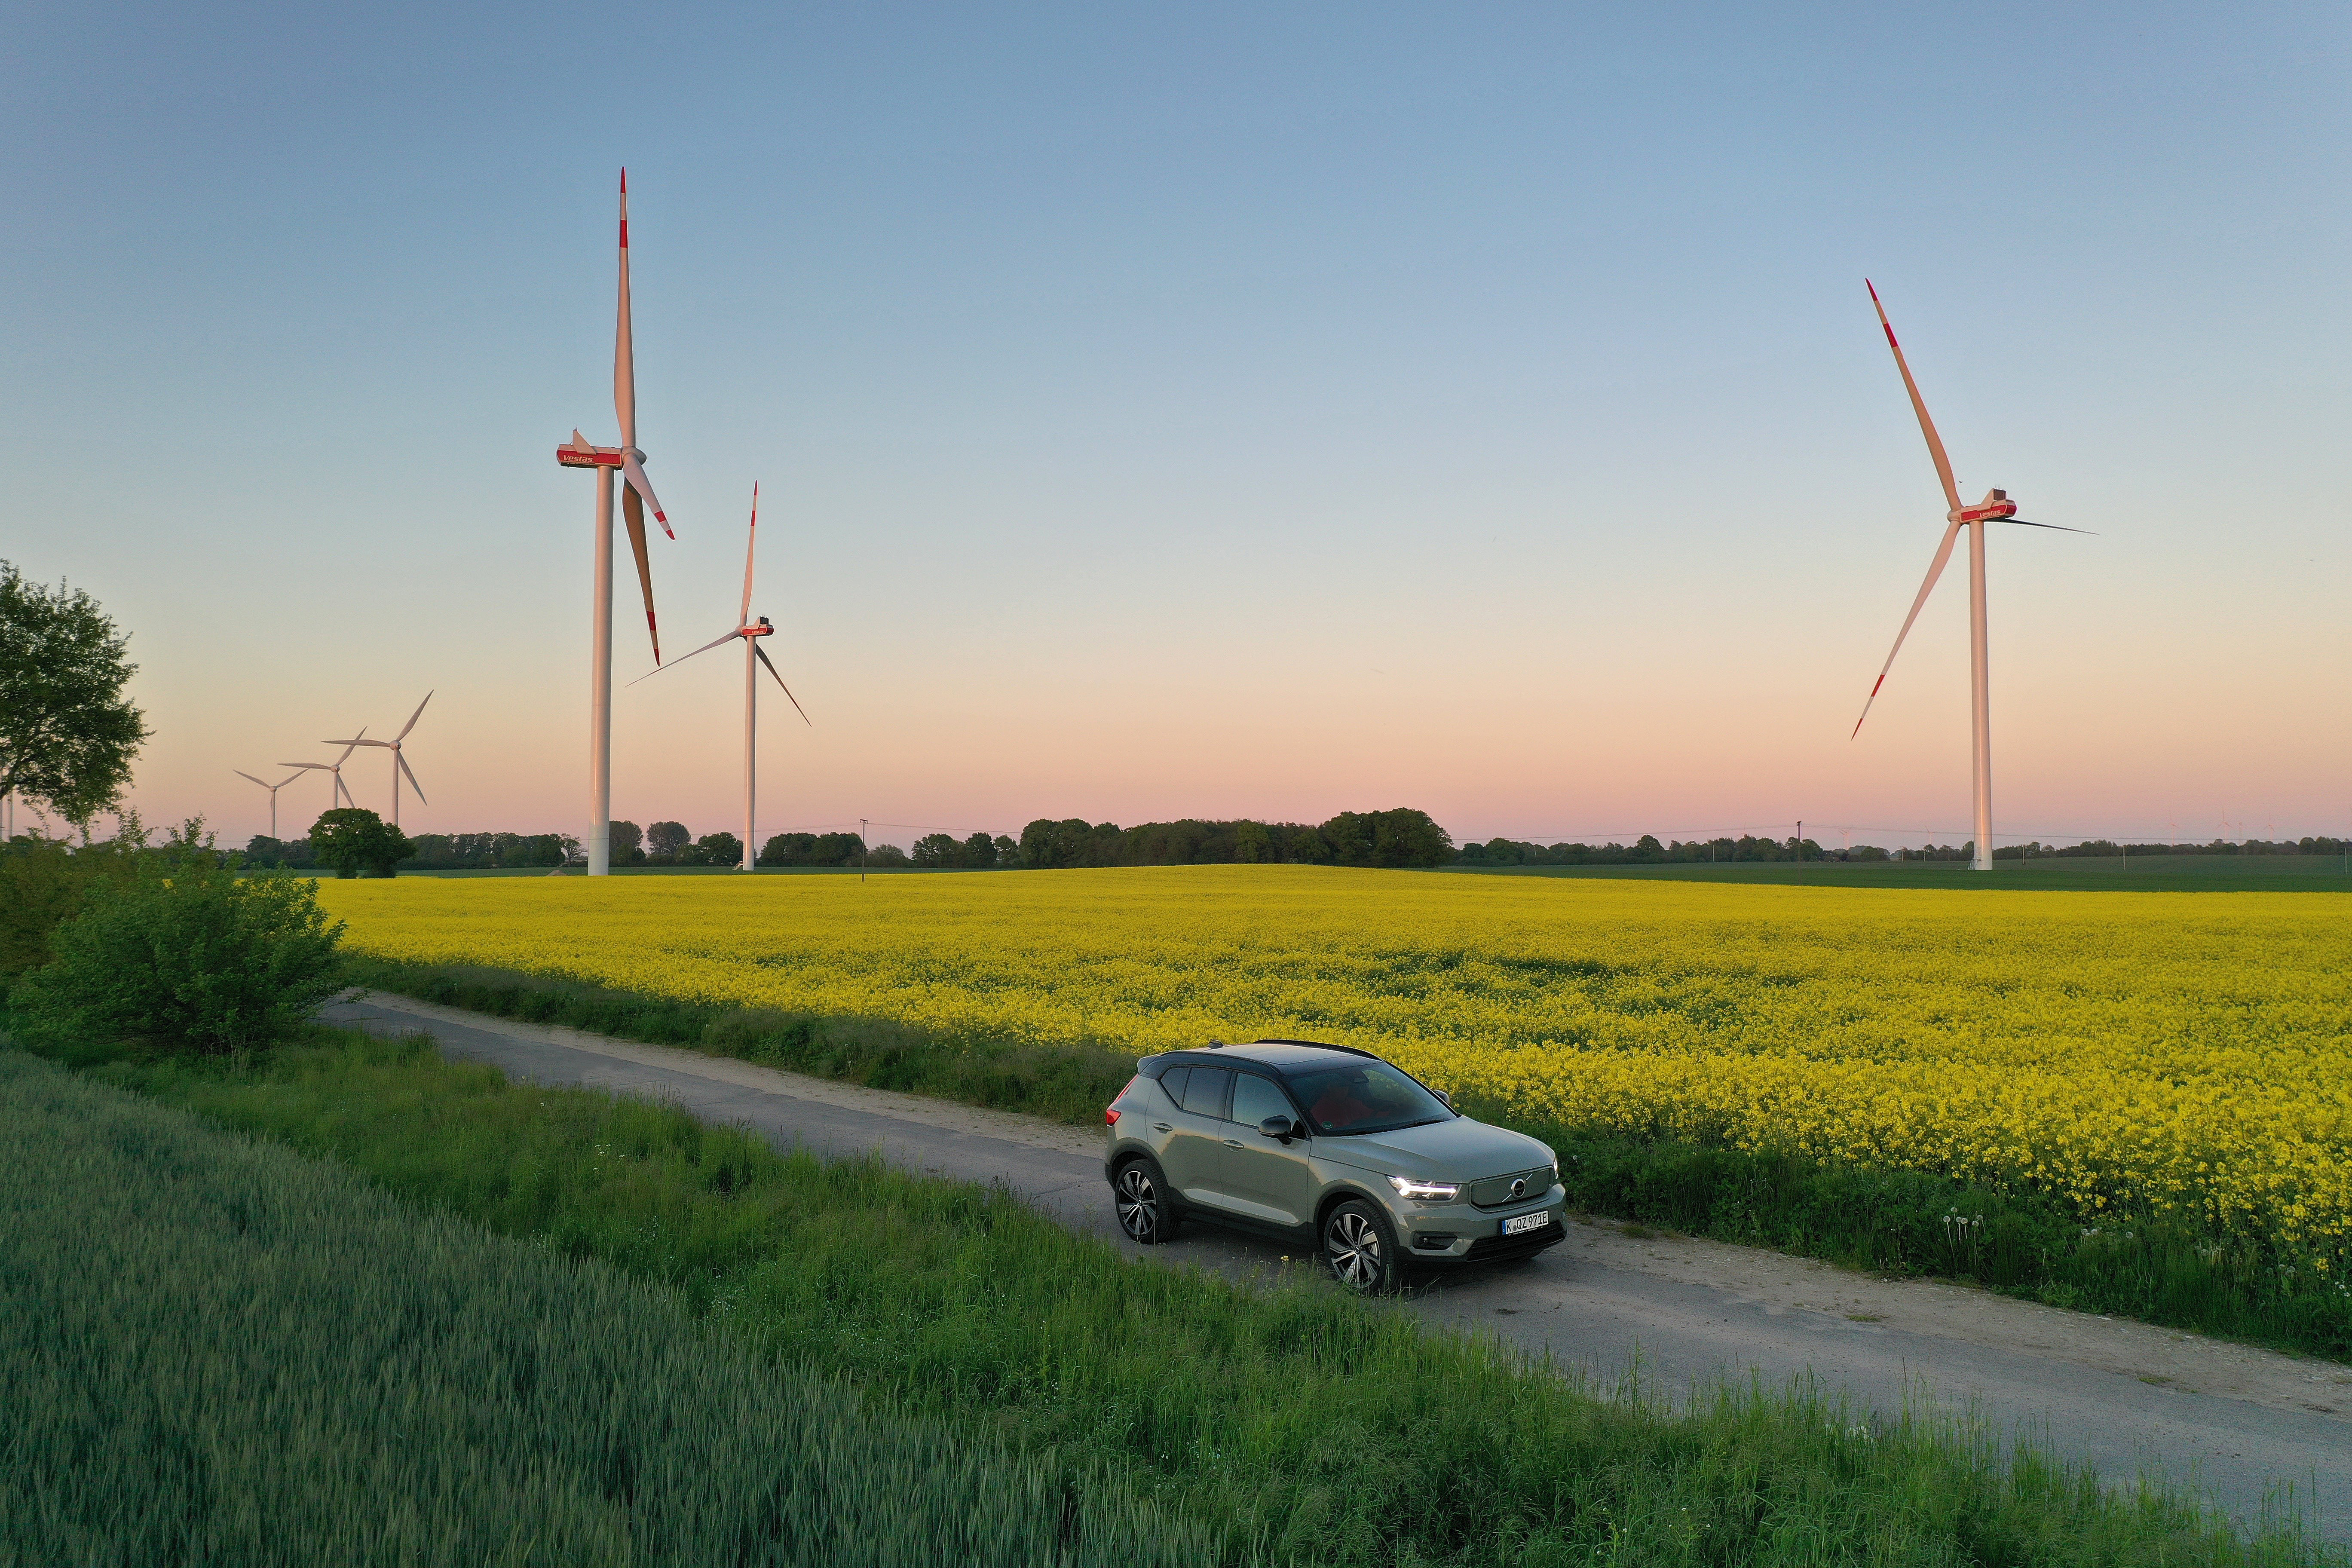 electric car driving on a countryside road with fields and windmills behind it